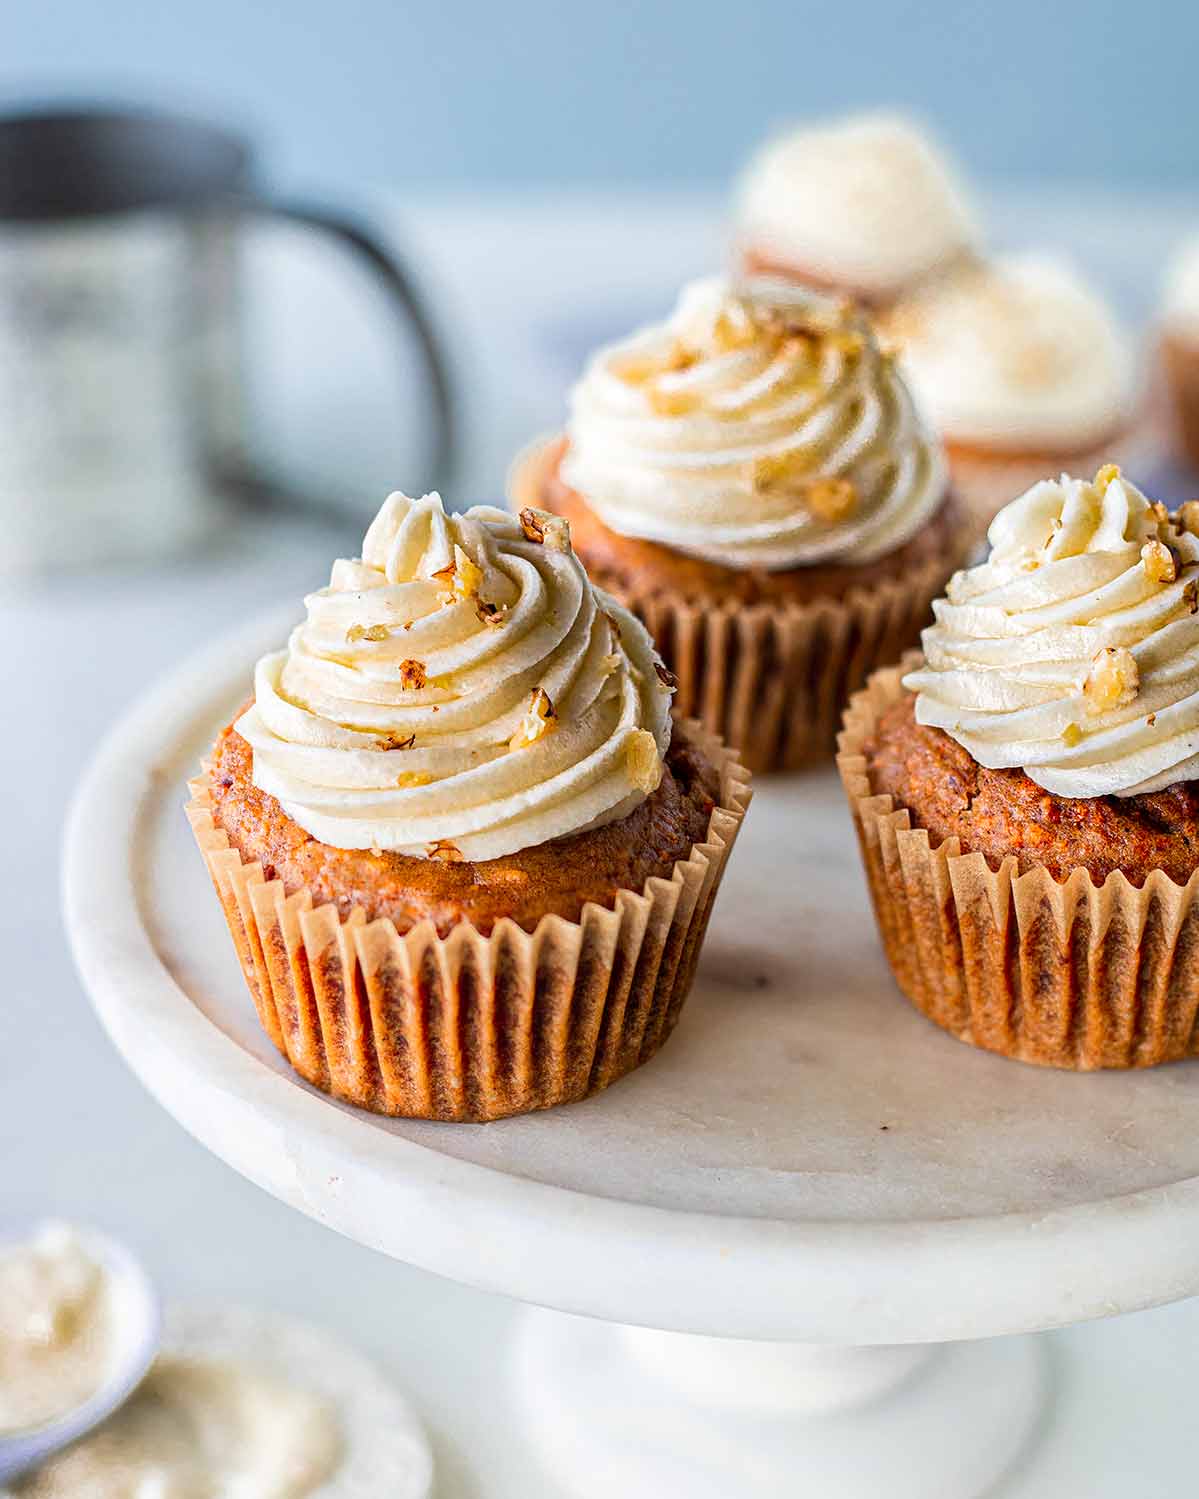 Easy vegan carrot cake cupakes with cream cheese frosting on cake stand.